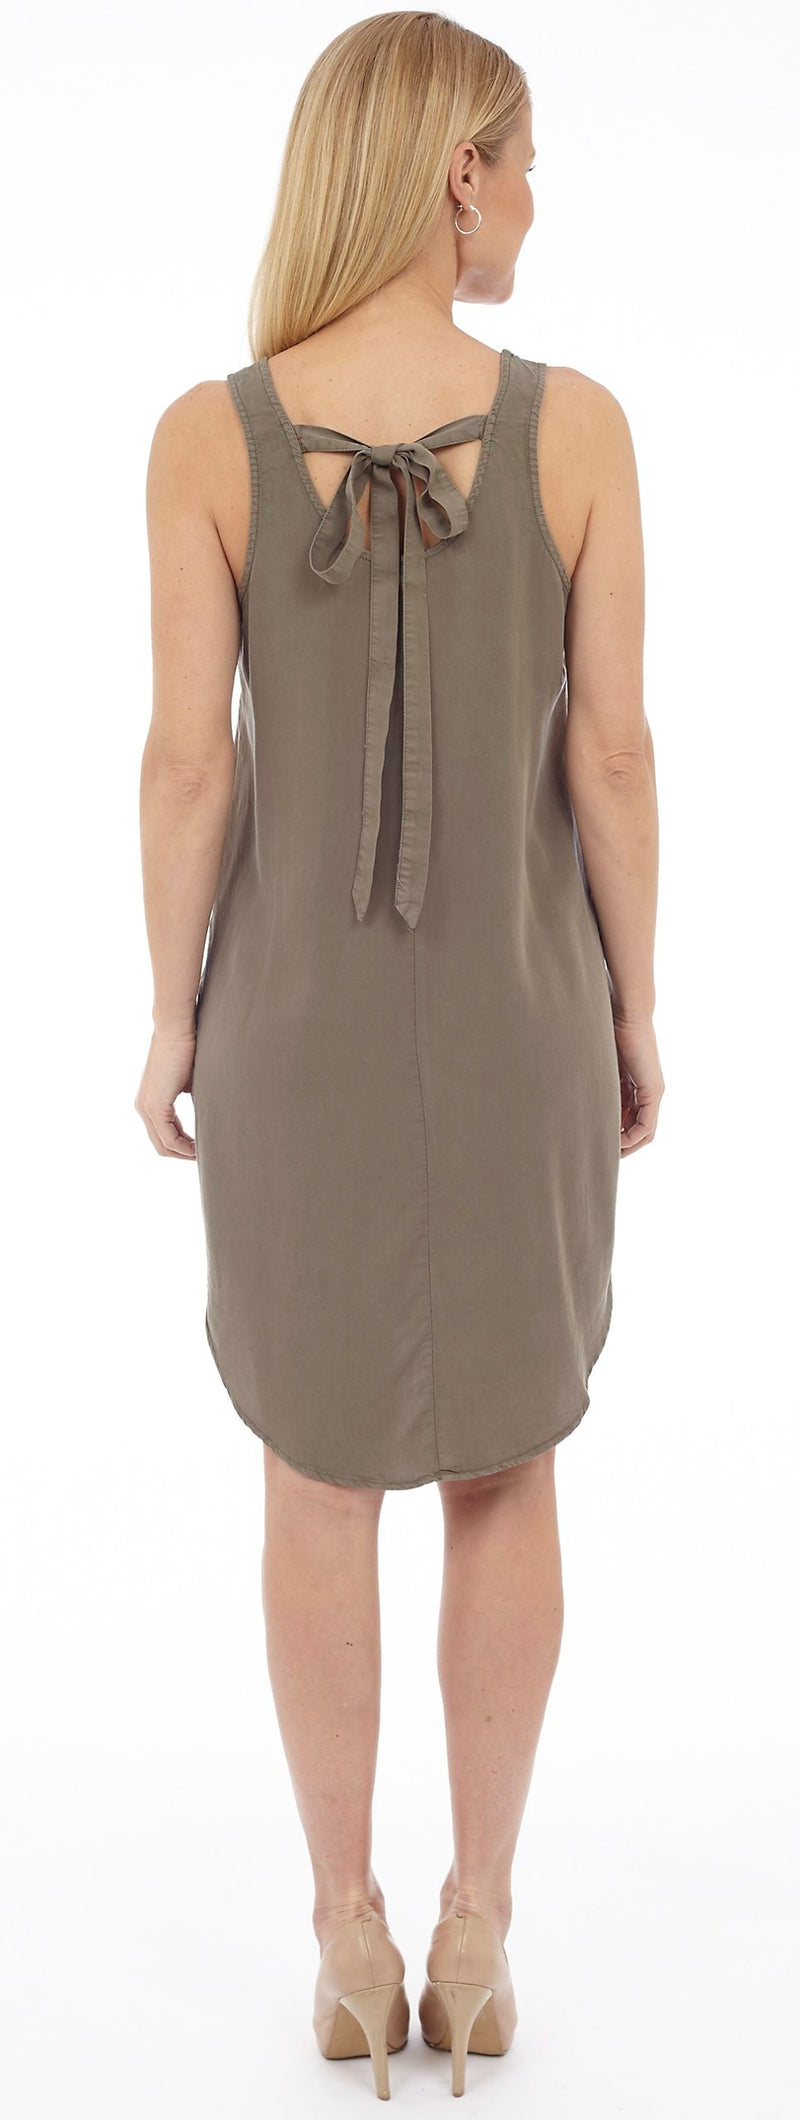 Sleeveless Dress with Back Tie Detail